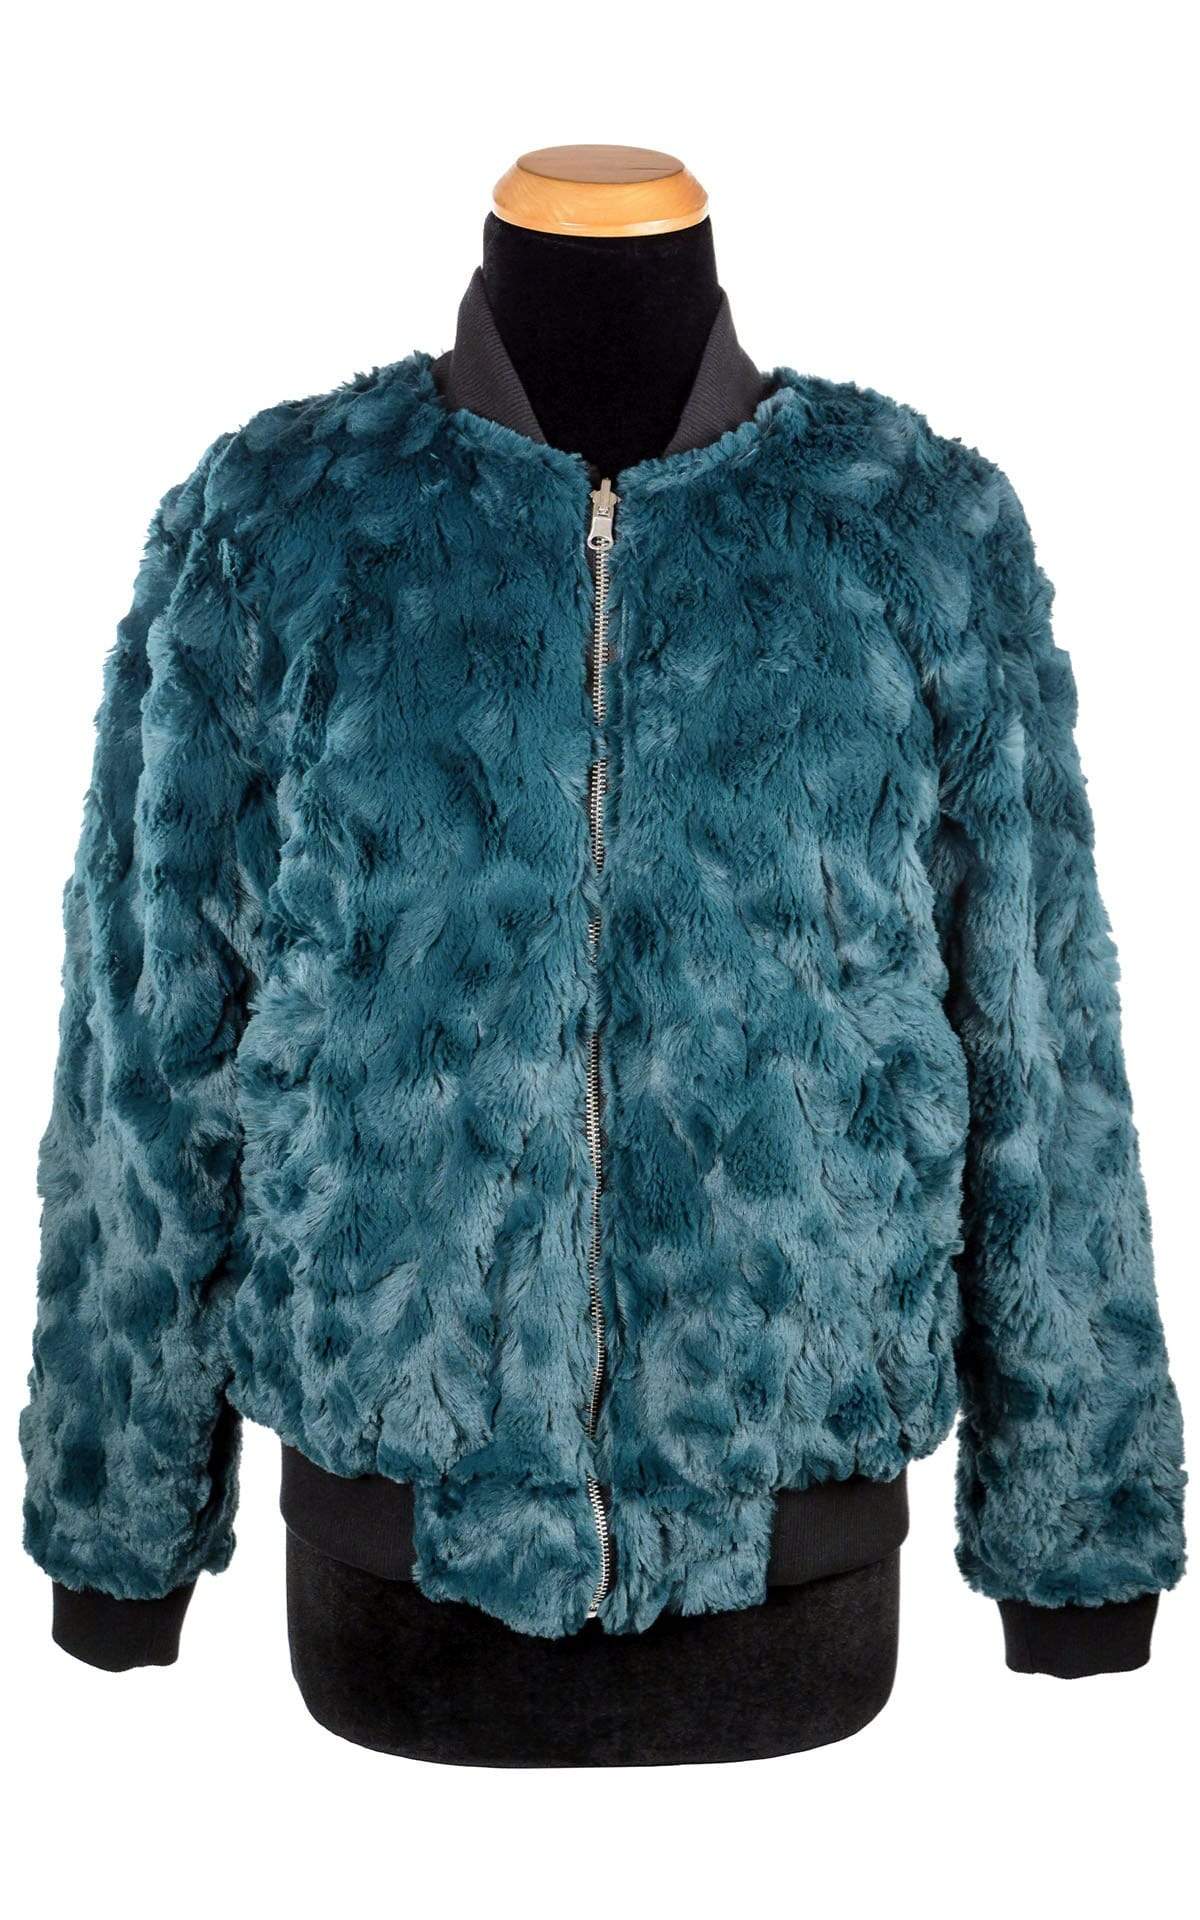 Zipped, reversible Amelia Bomber Jacket in Peacock Pond Blue Faux Fur and Black Faux Fur | Handmade in Seattle WA| Pandemonium Millinery